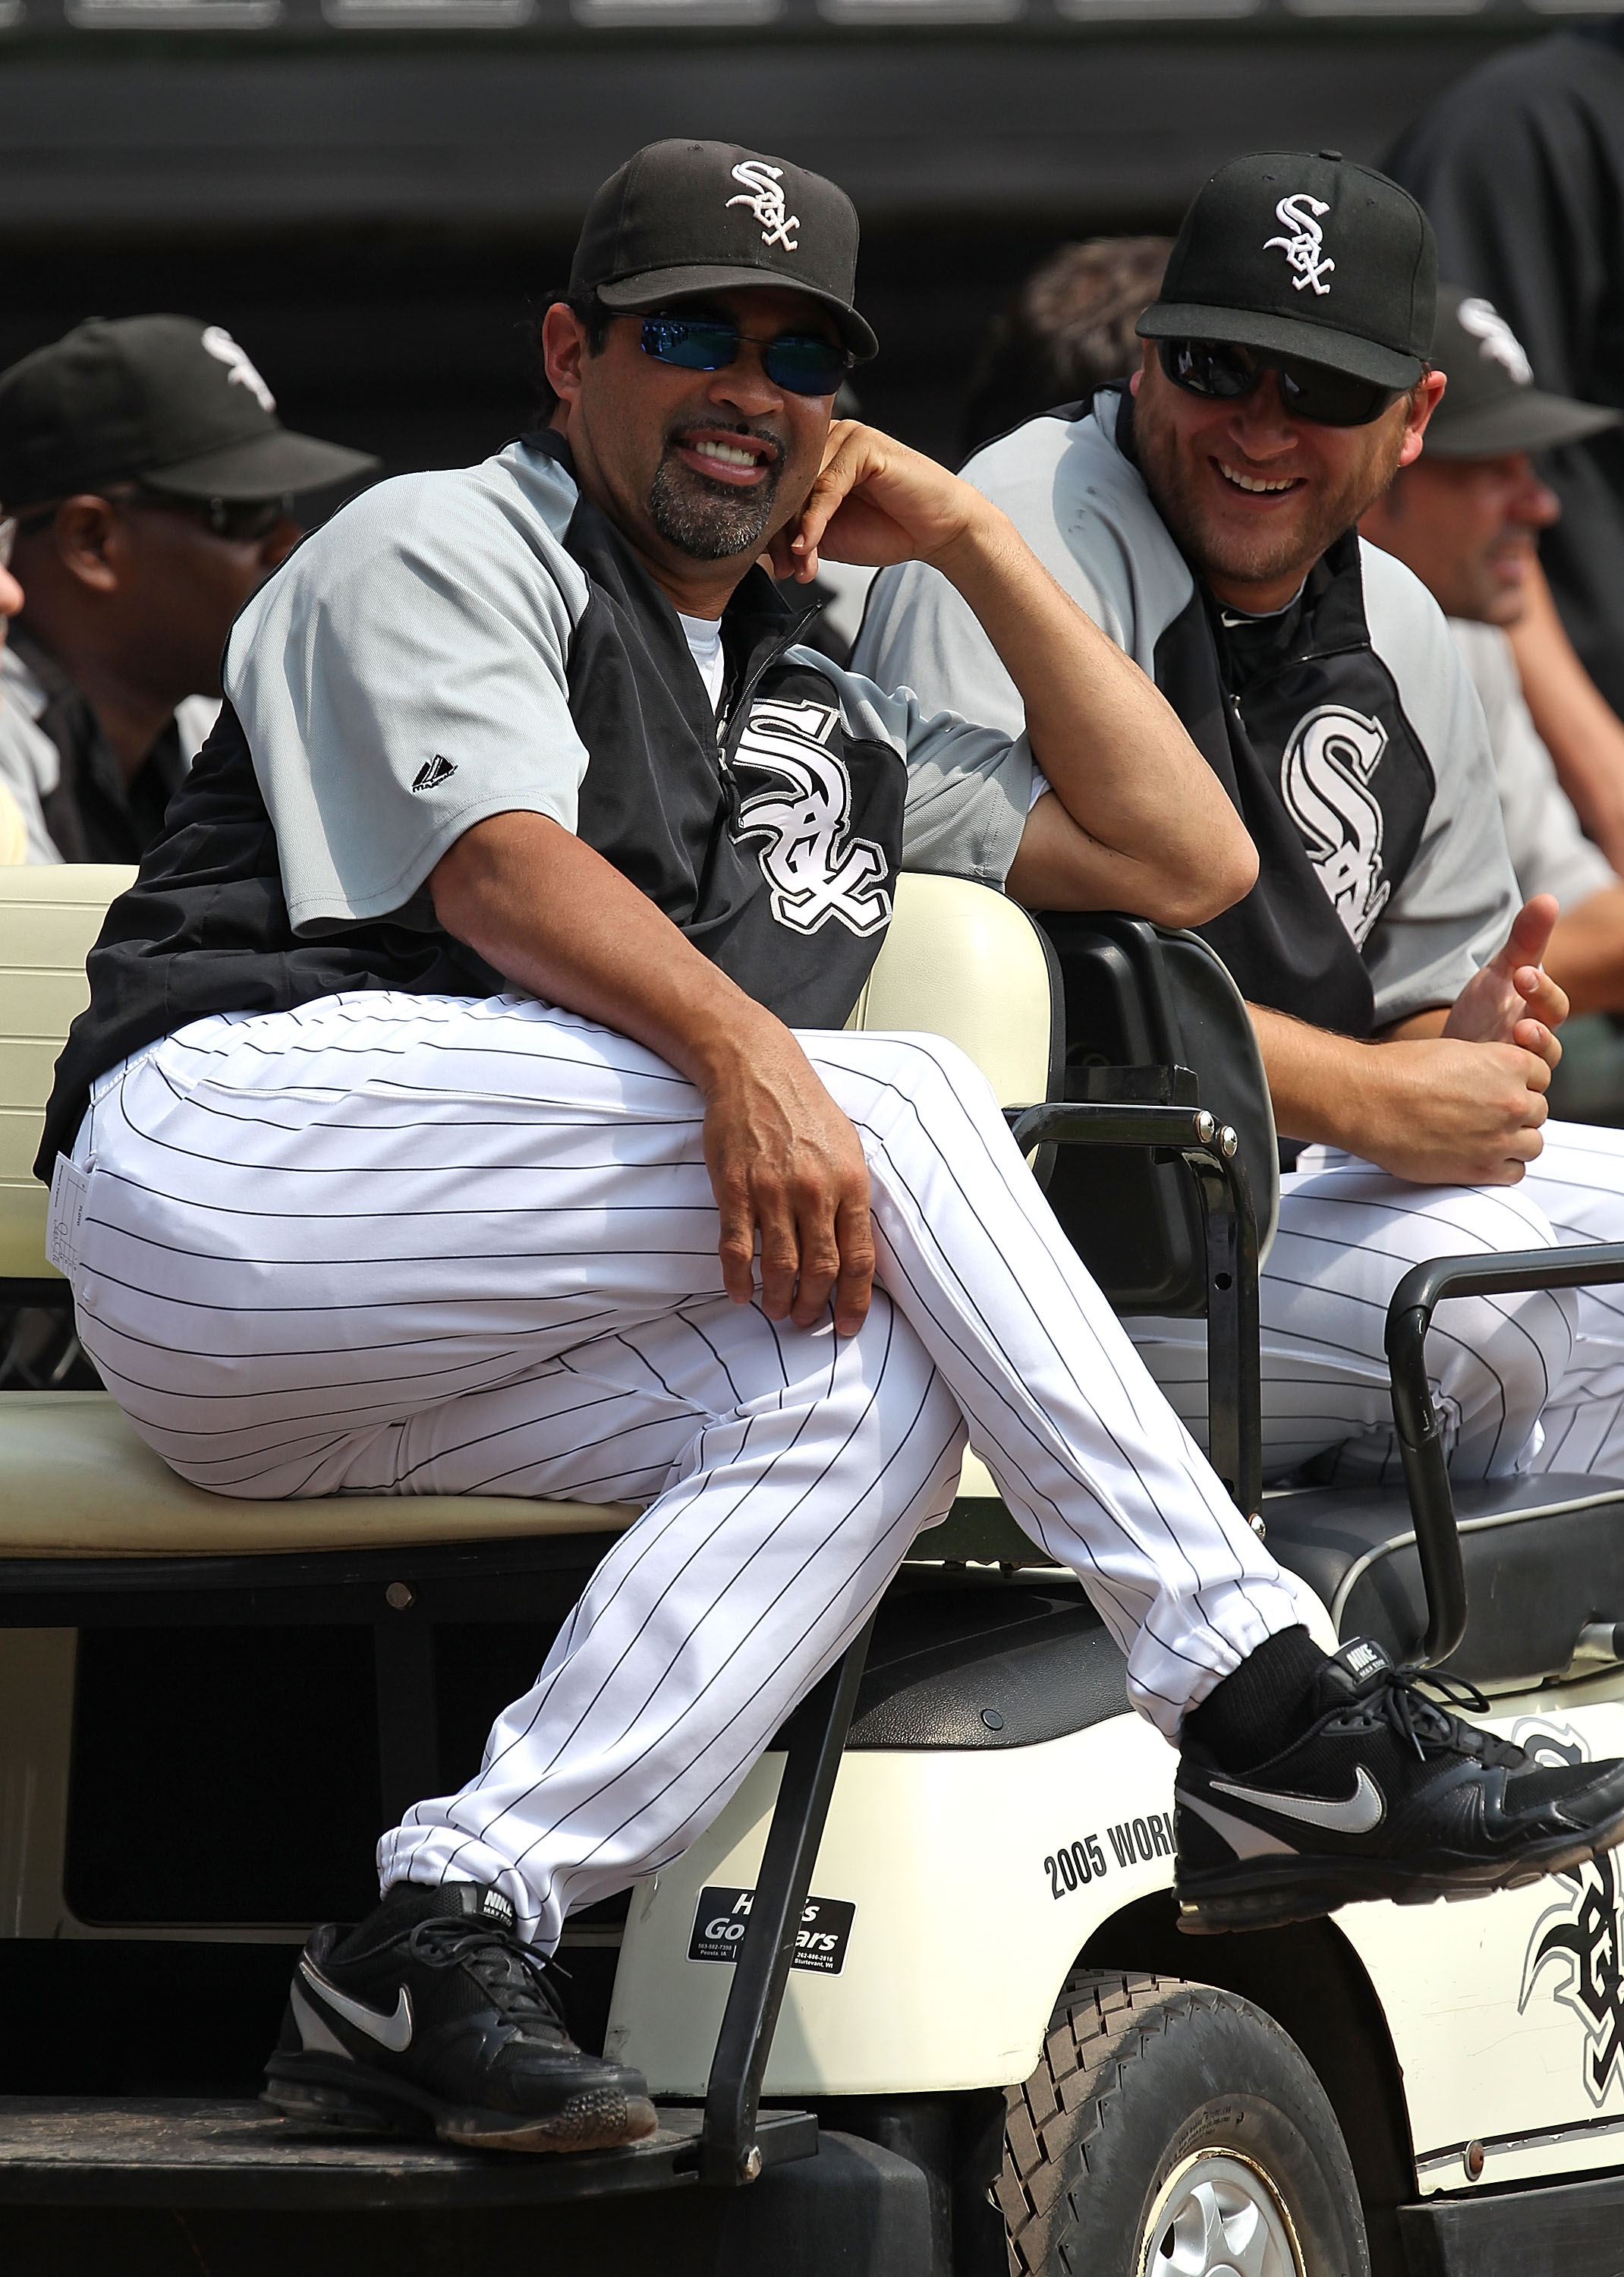 The White Sox Injury Problem With Scott Podsednik (and Special